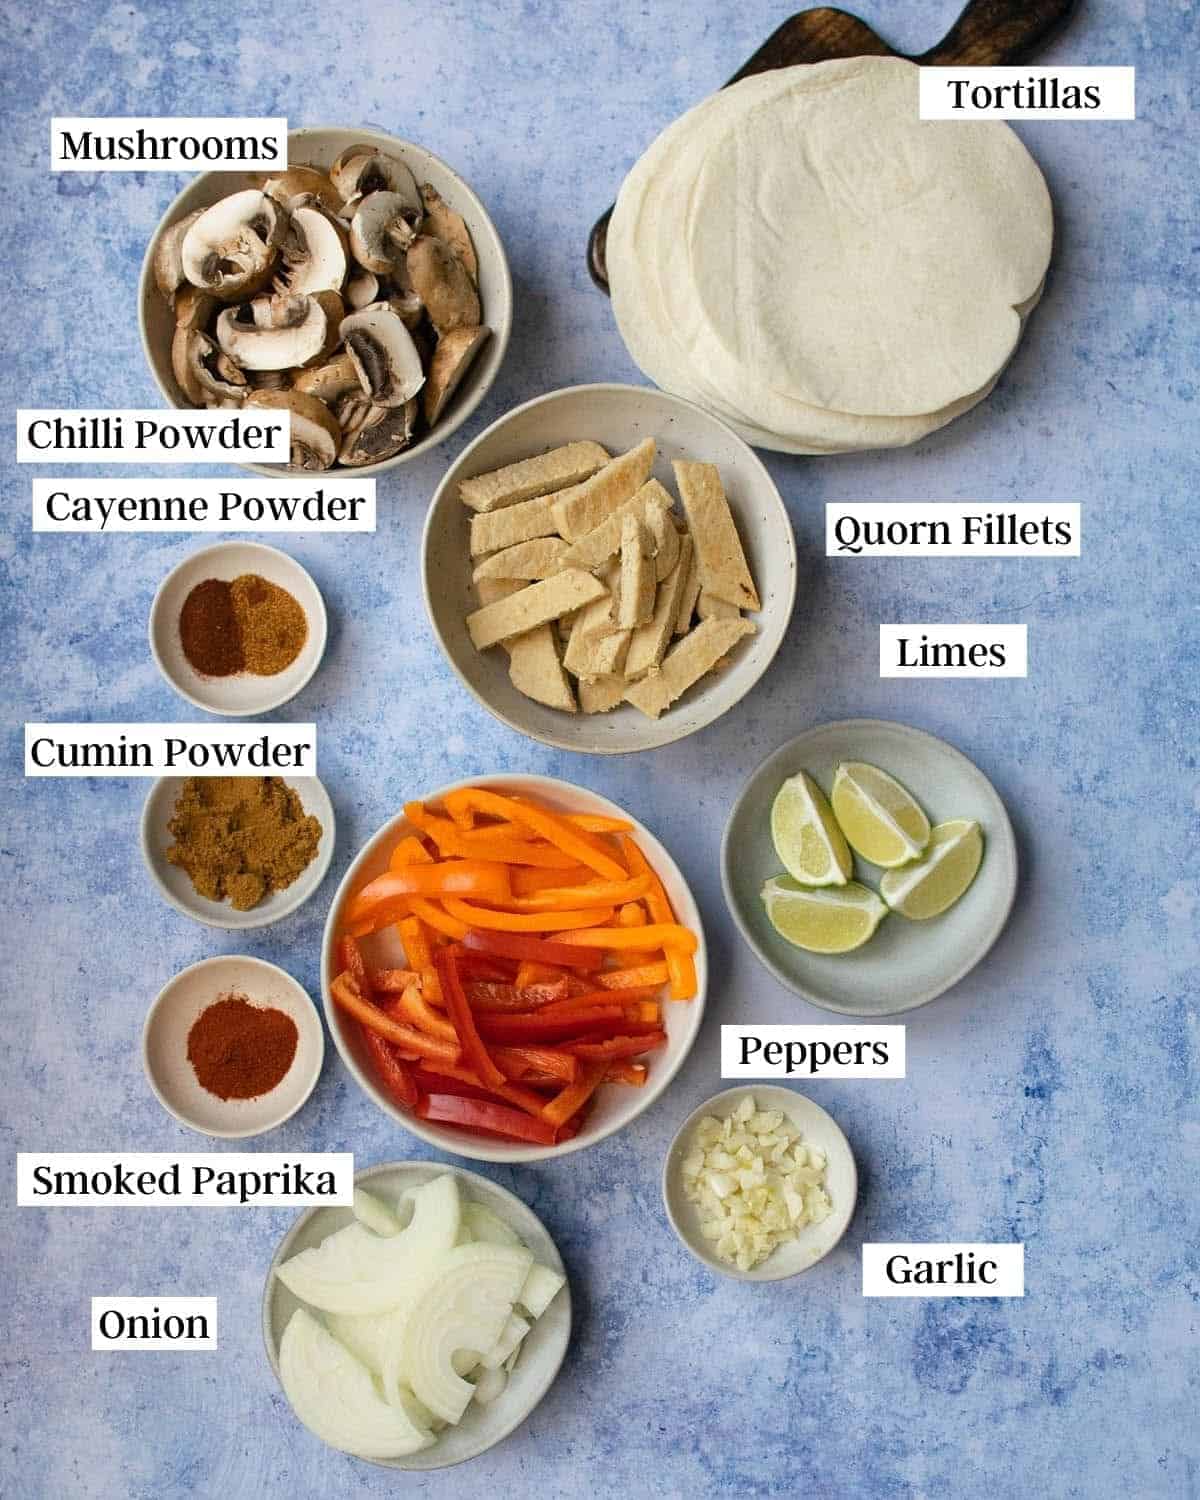 Ingredients laid out in bowls